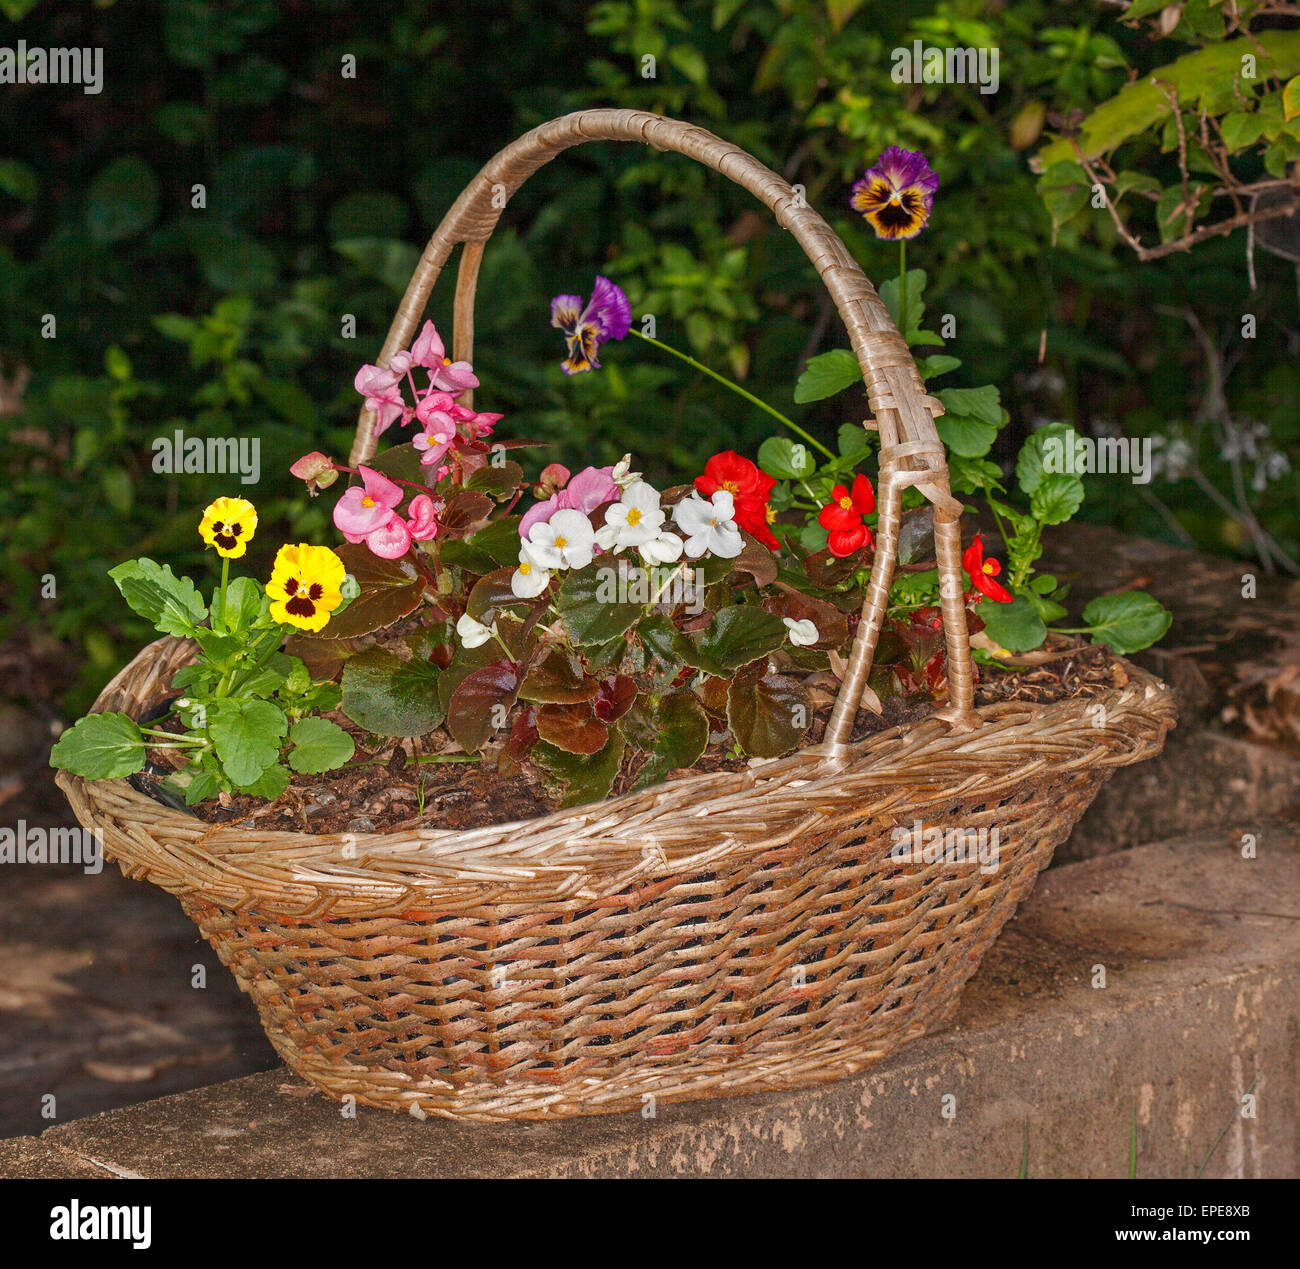 Large recycled wicker basket with flowering plants growing in it - yellow and purple pansies & red, pink, & white bedding begonias on dark background Stock Photo